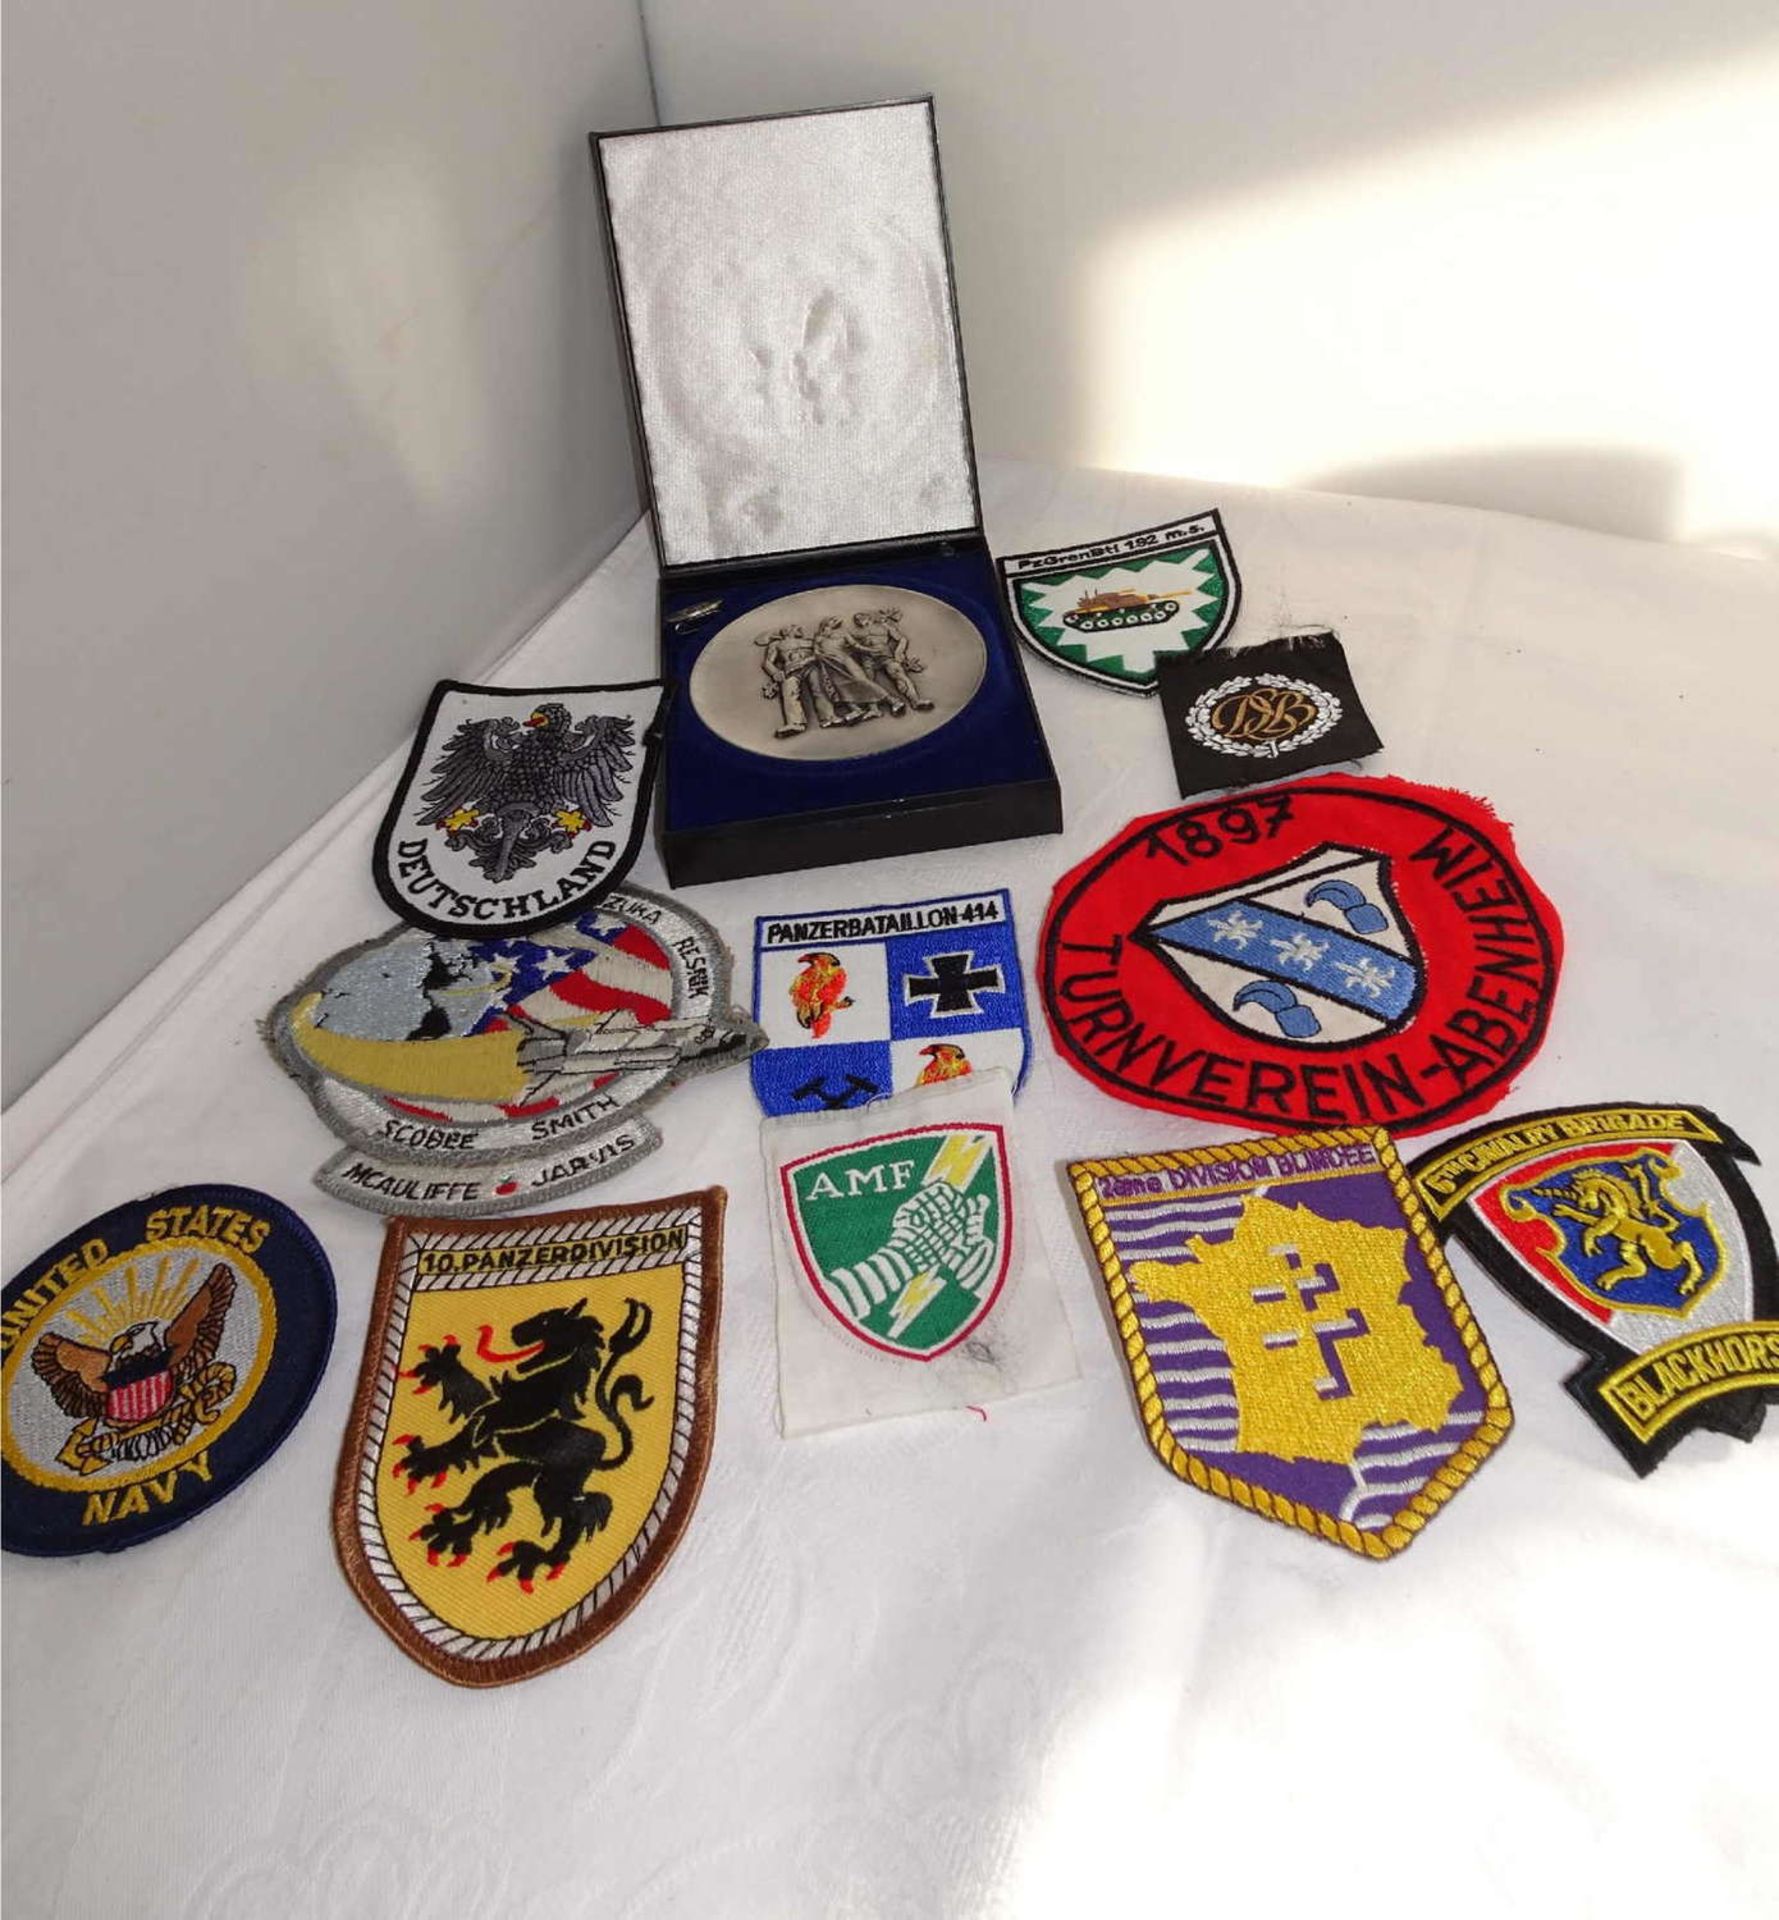 Medals and 1 lot of badges / patches, mostly military.